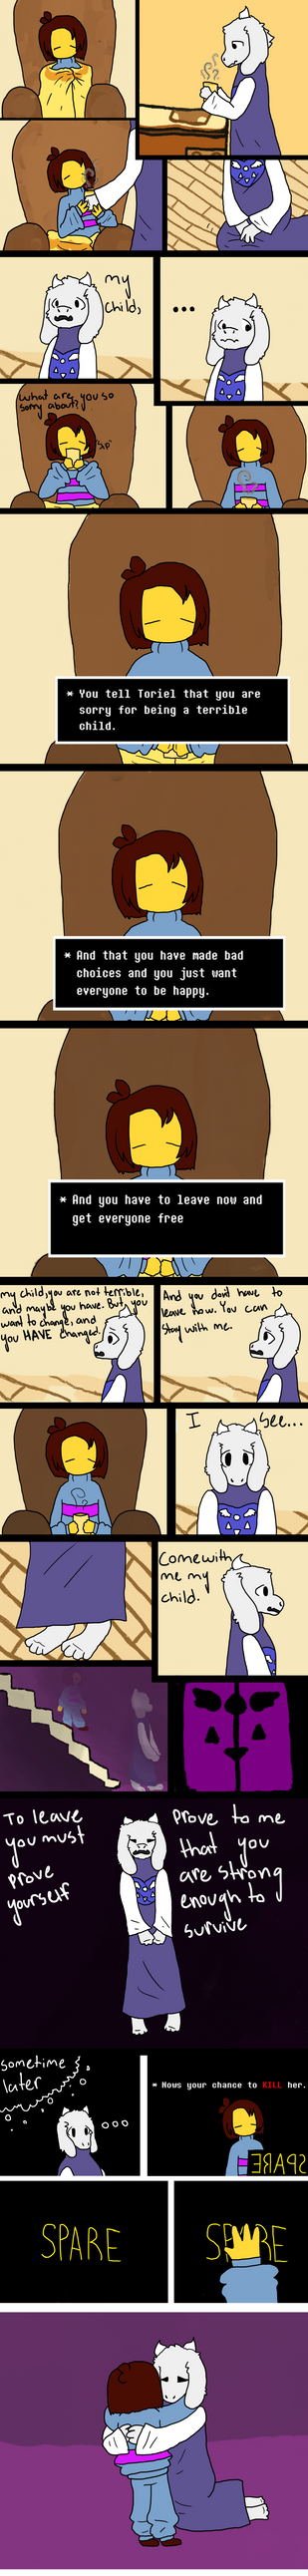 The Story of Frisk and Chara Page 3